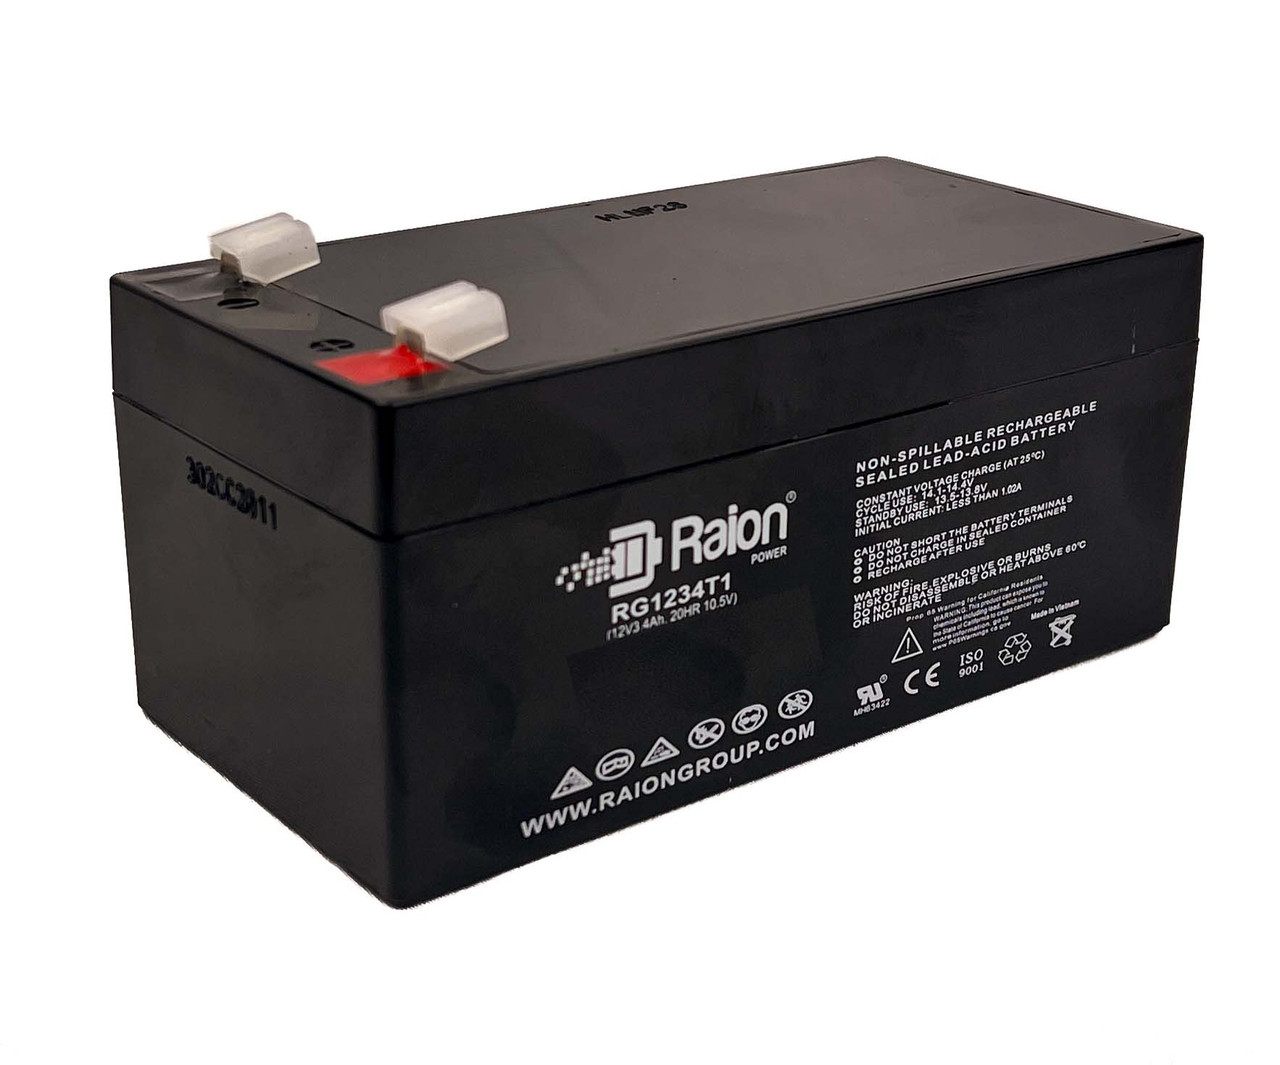 Raion Power 12V 3.4Ah Non-Spillable Replacement Battery for Himalaya 6FM3.2